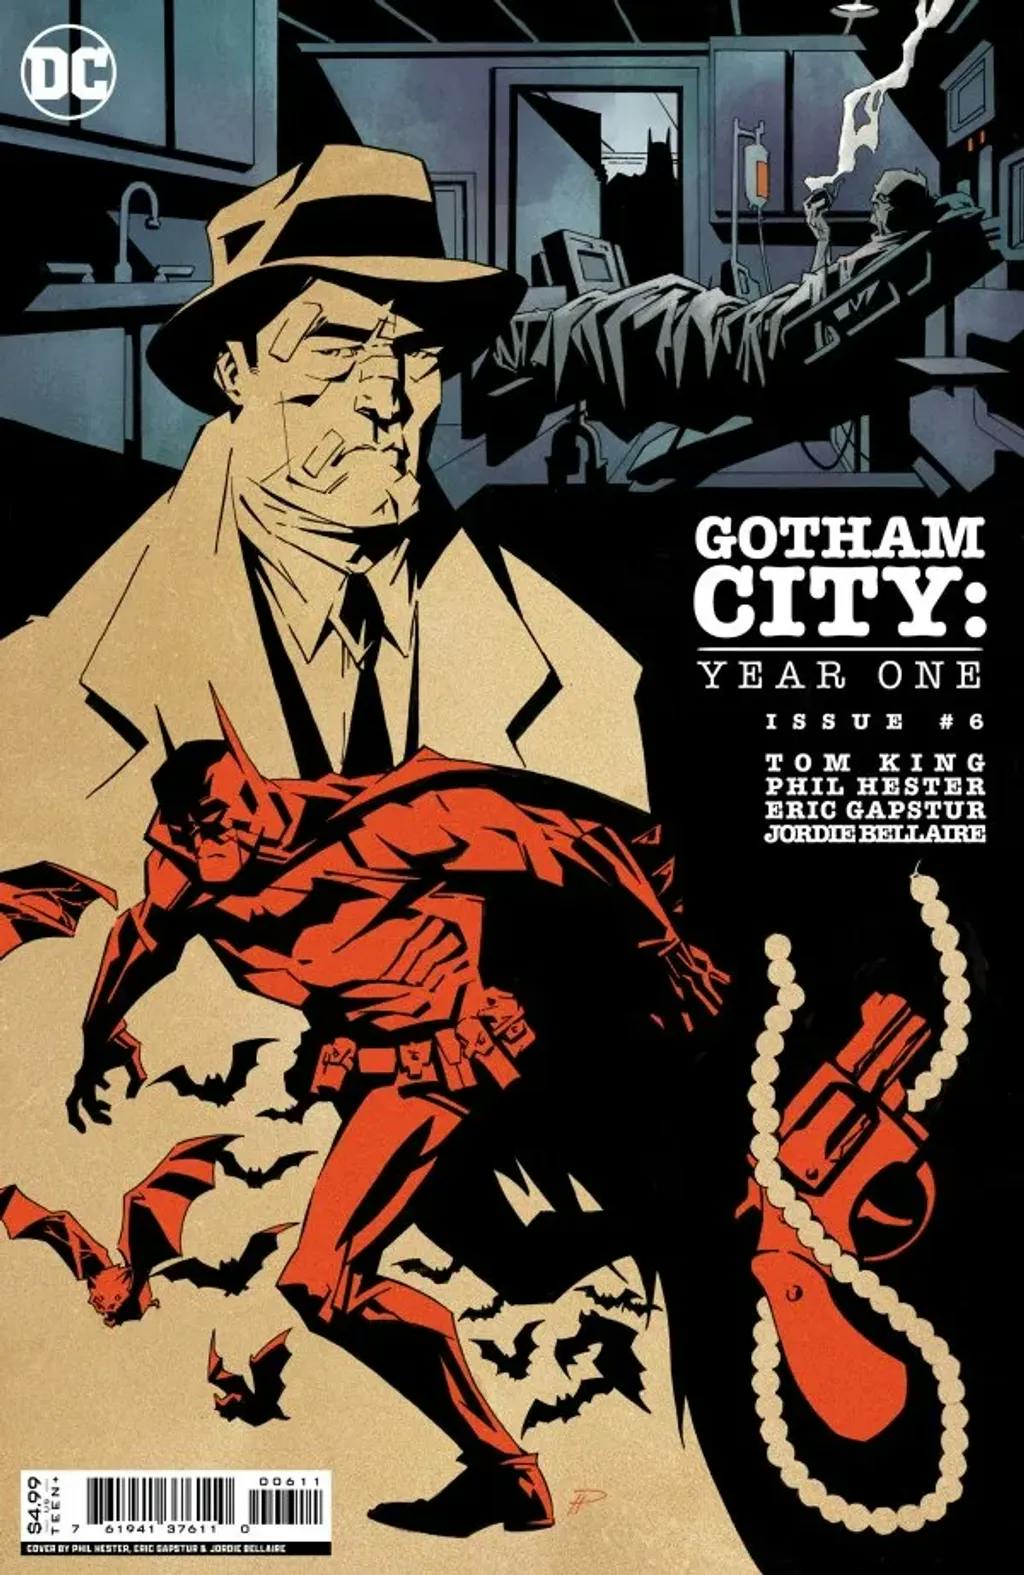 Gotham City: Year One #6 by Tom King, Phil Hester, Eric Gapstur, and Jordie Bellaire